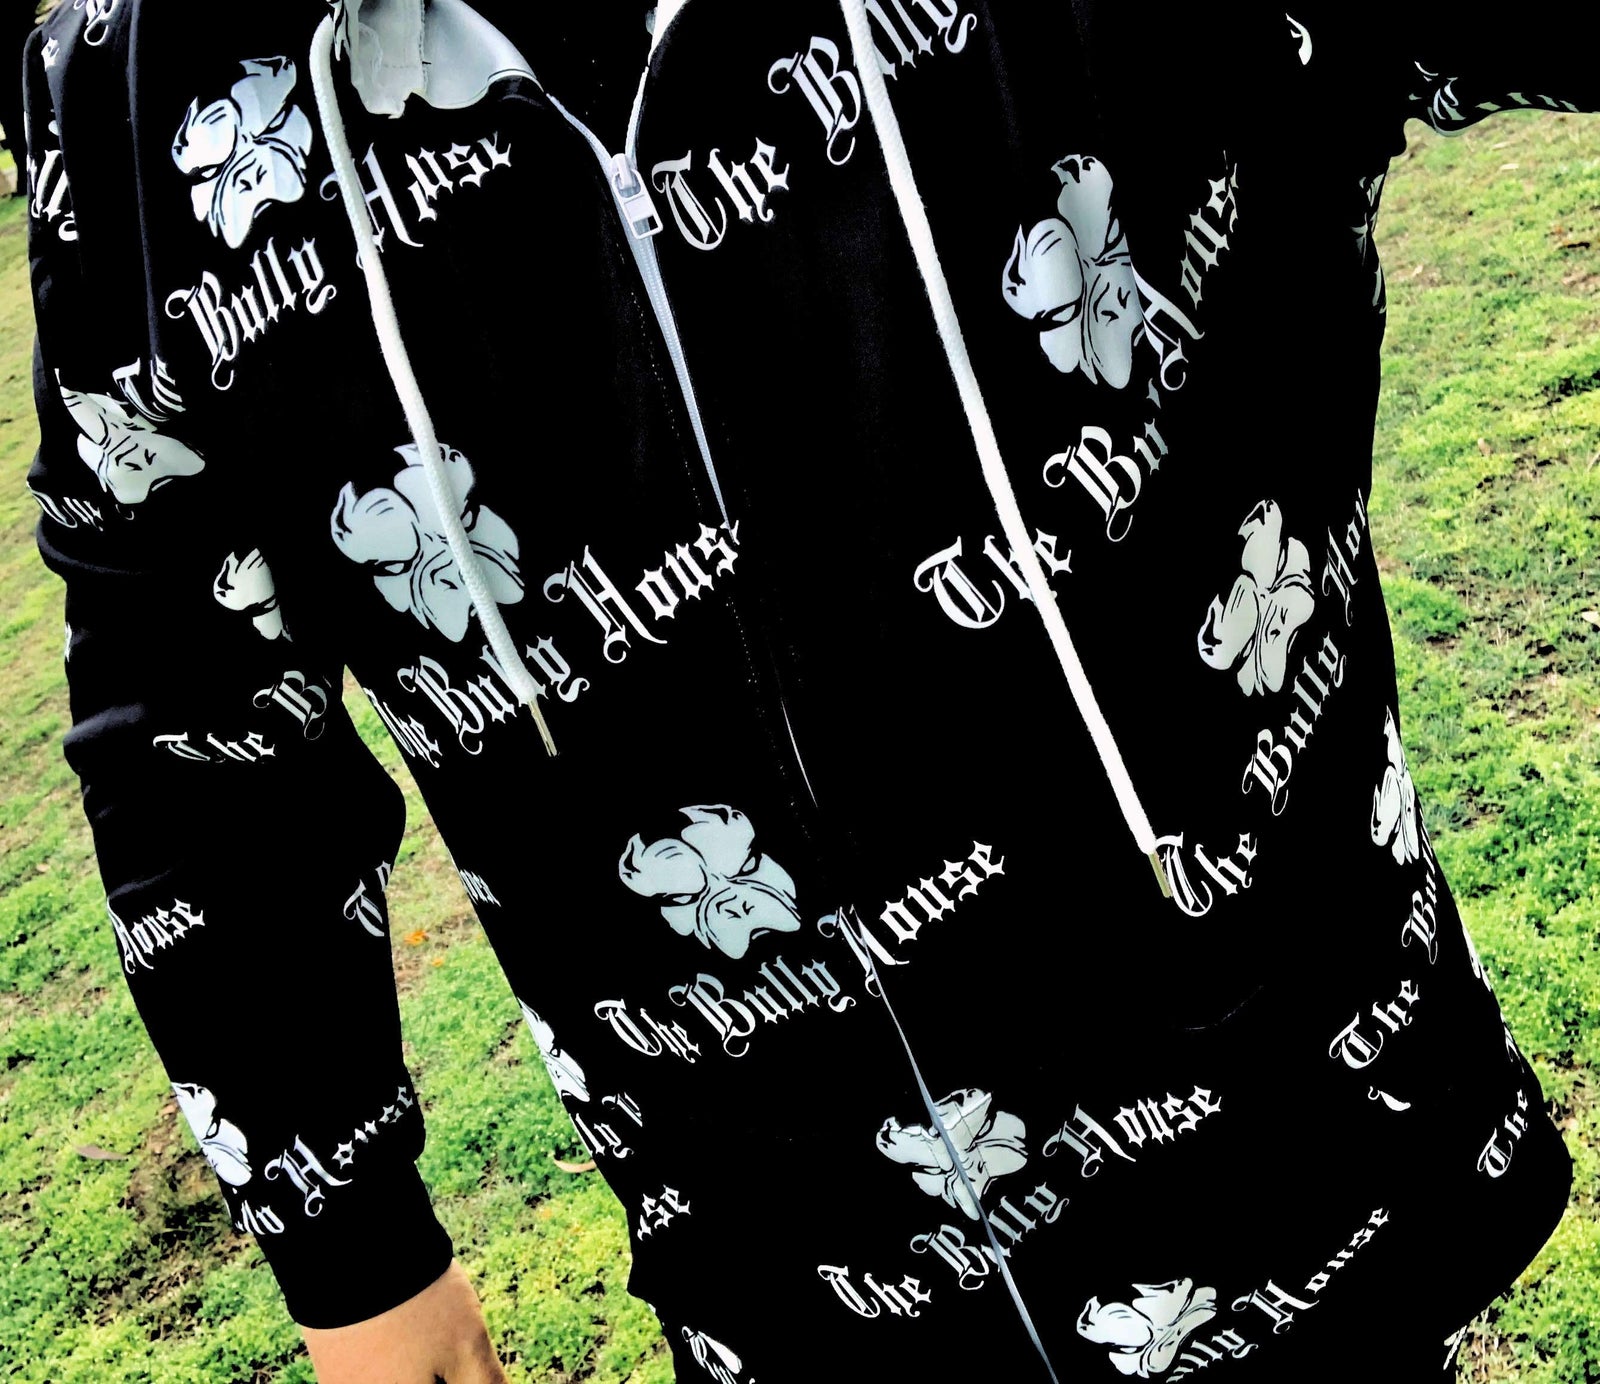 All Over Print - The Bully House -- HARDCORE Zip Up Hoodie -- (Unisex) BLACK / WHITE